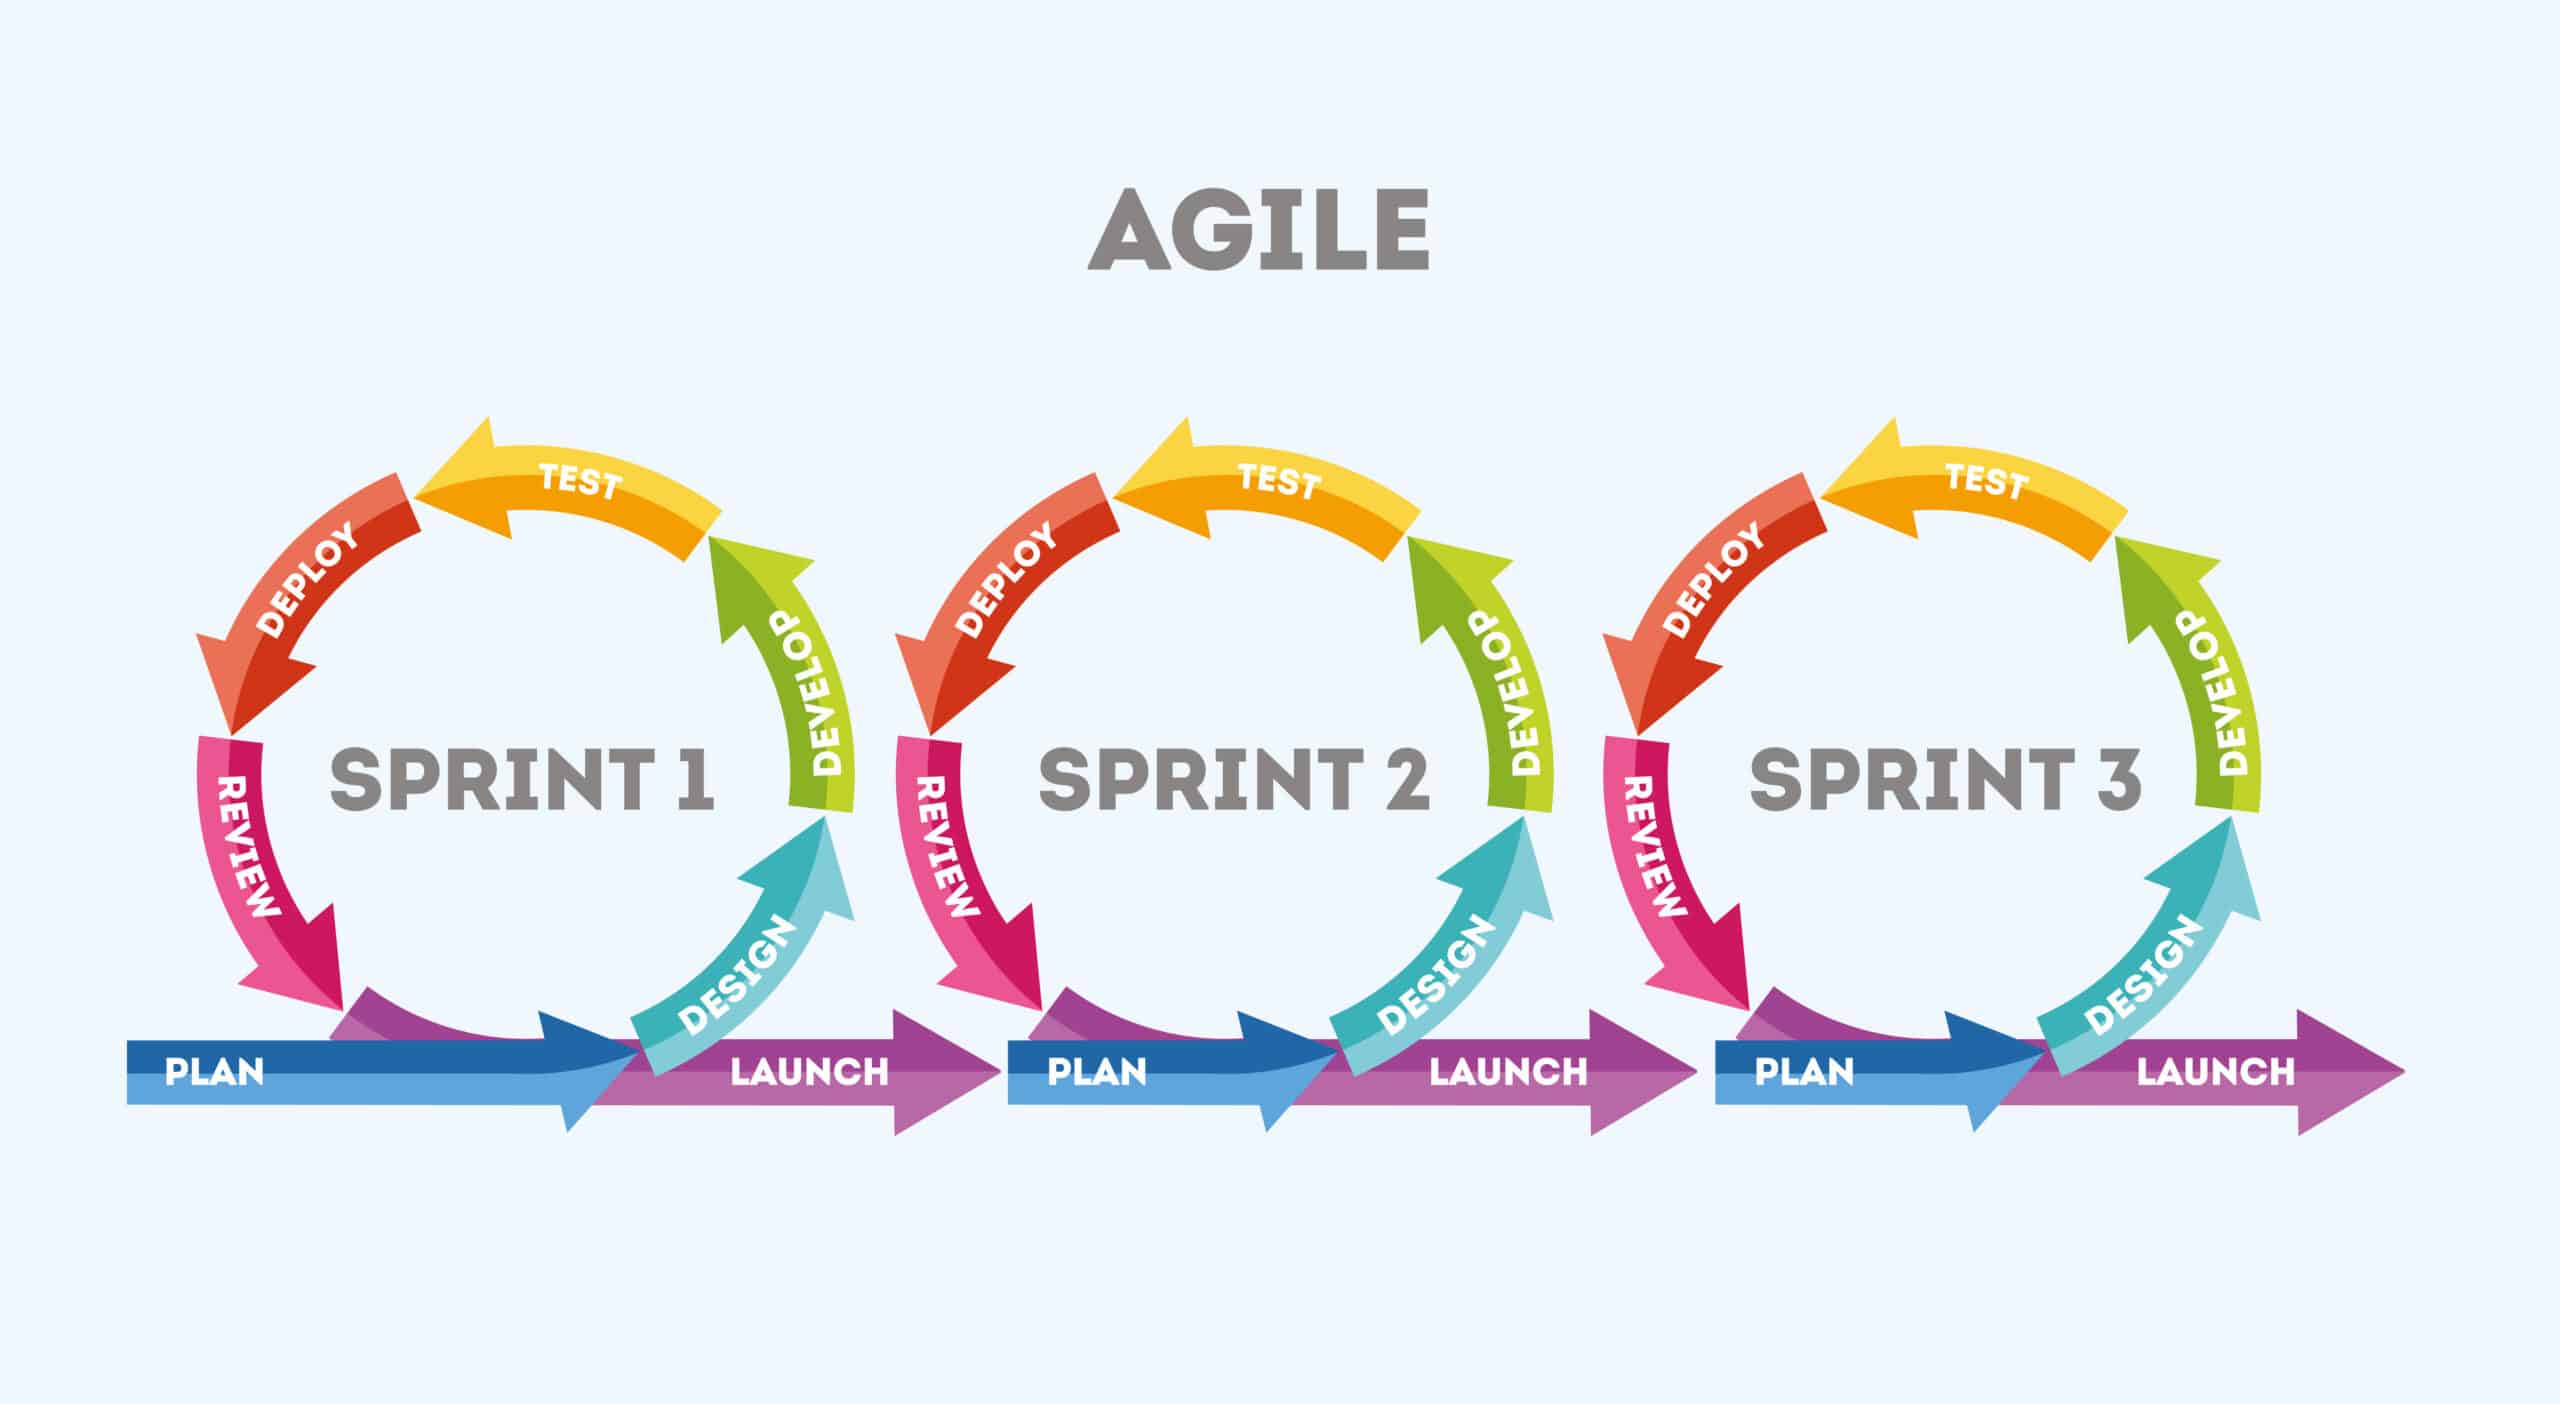 Three consecutive circles depicting the process of agile app development in Salesforce.